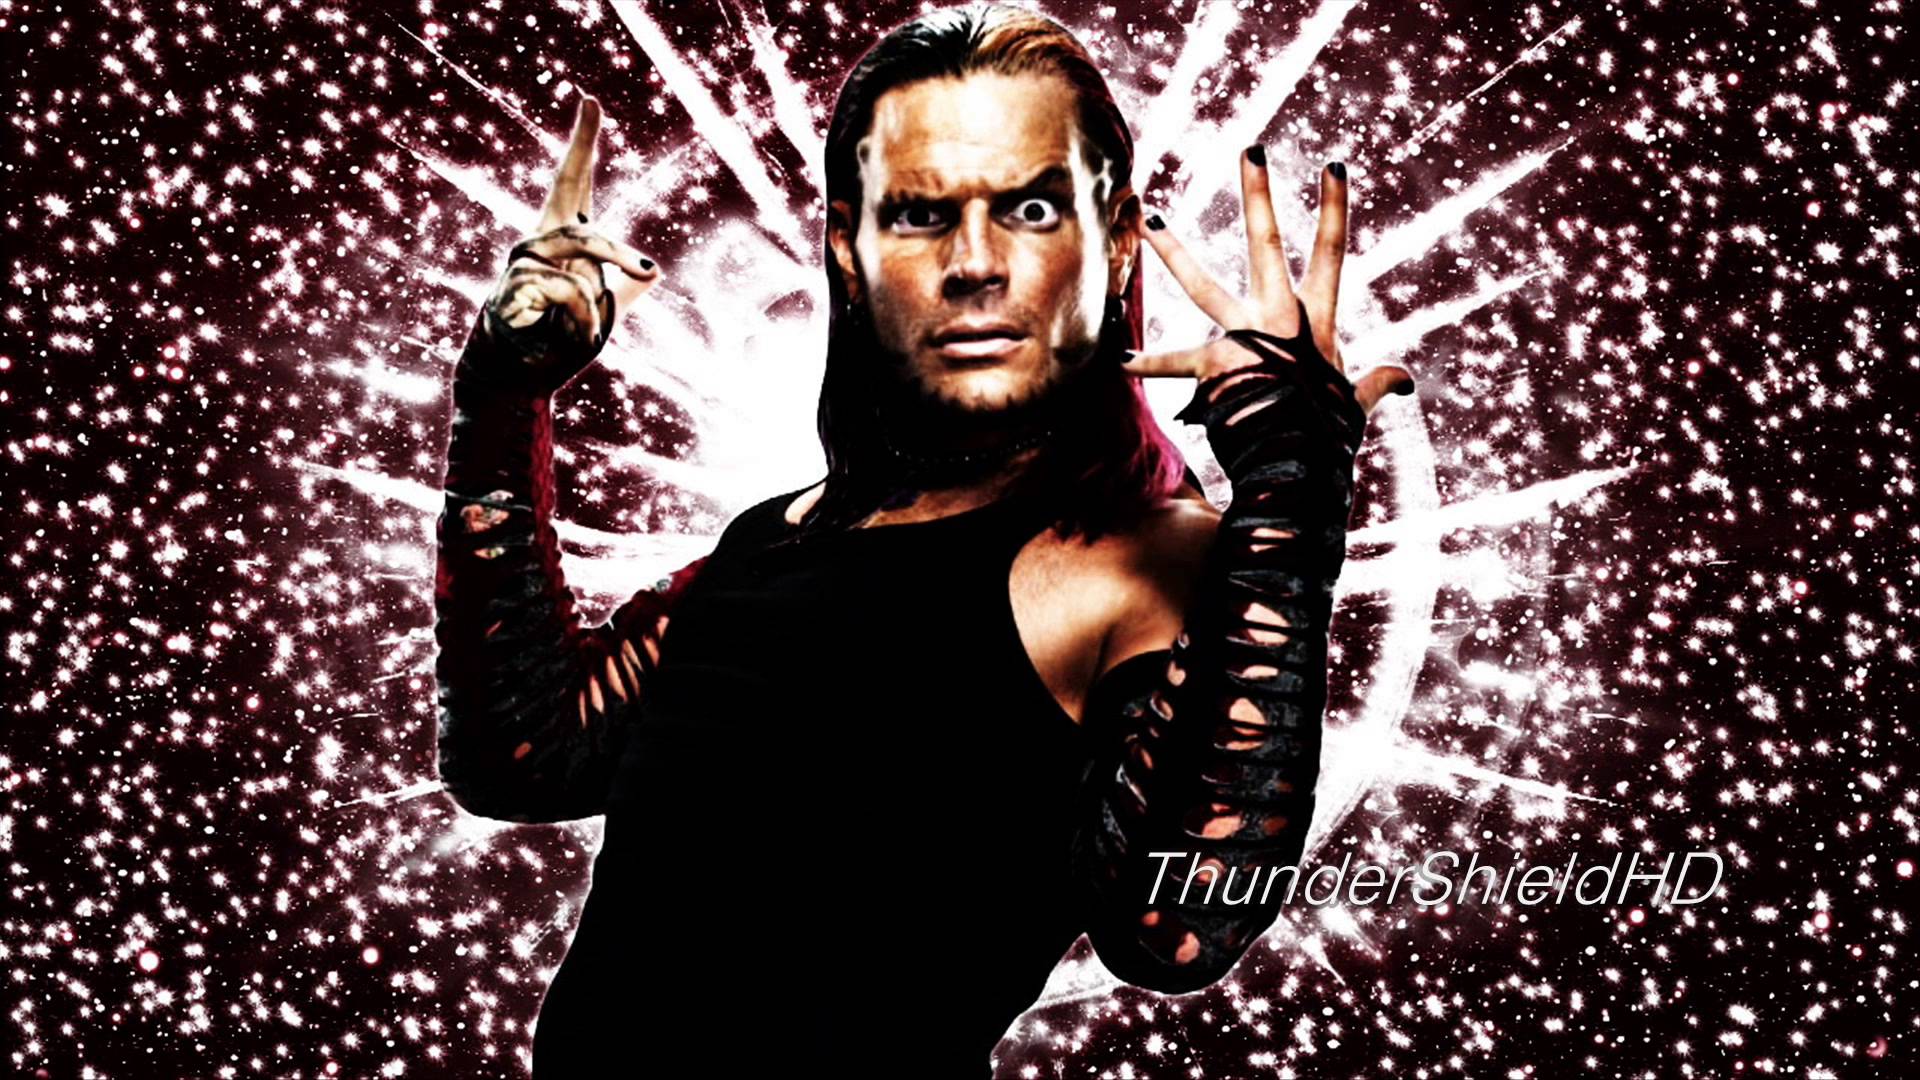 WWE Jeff Hardy Theme Song "No More Words" Full HD